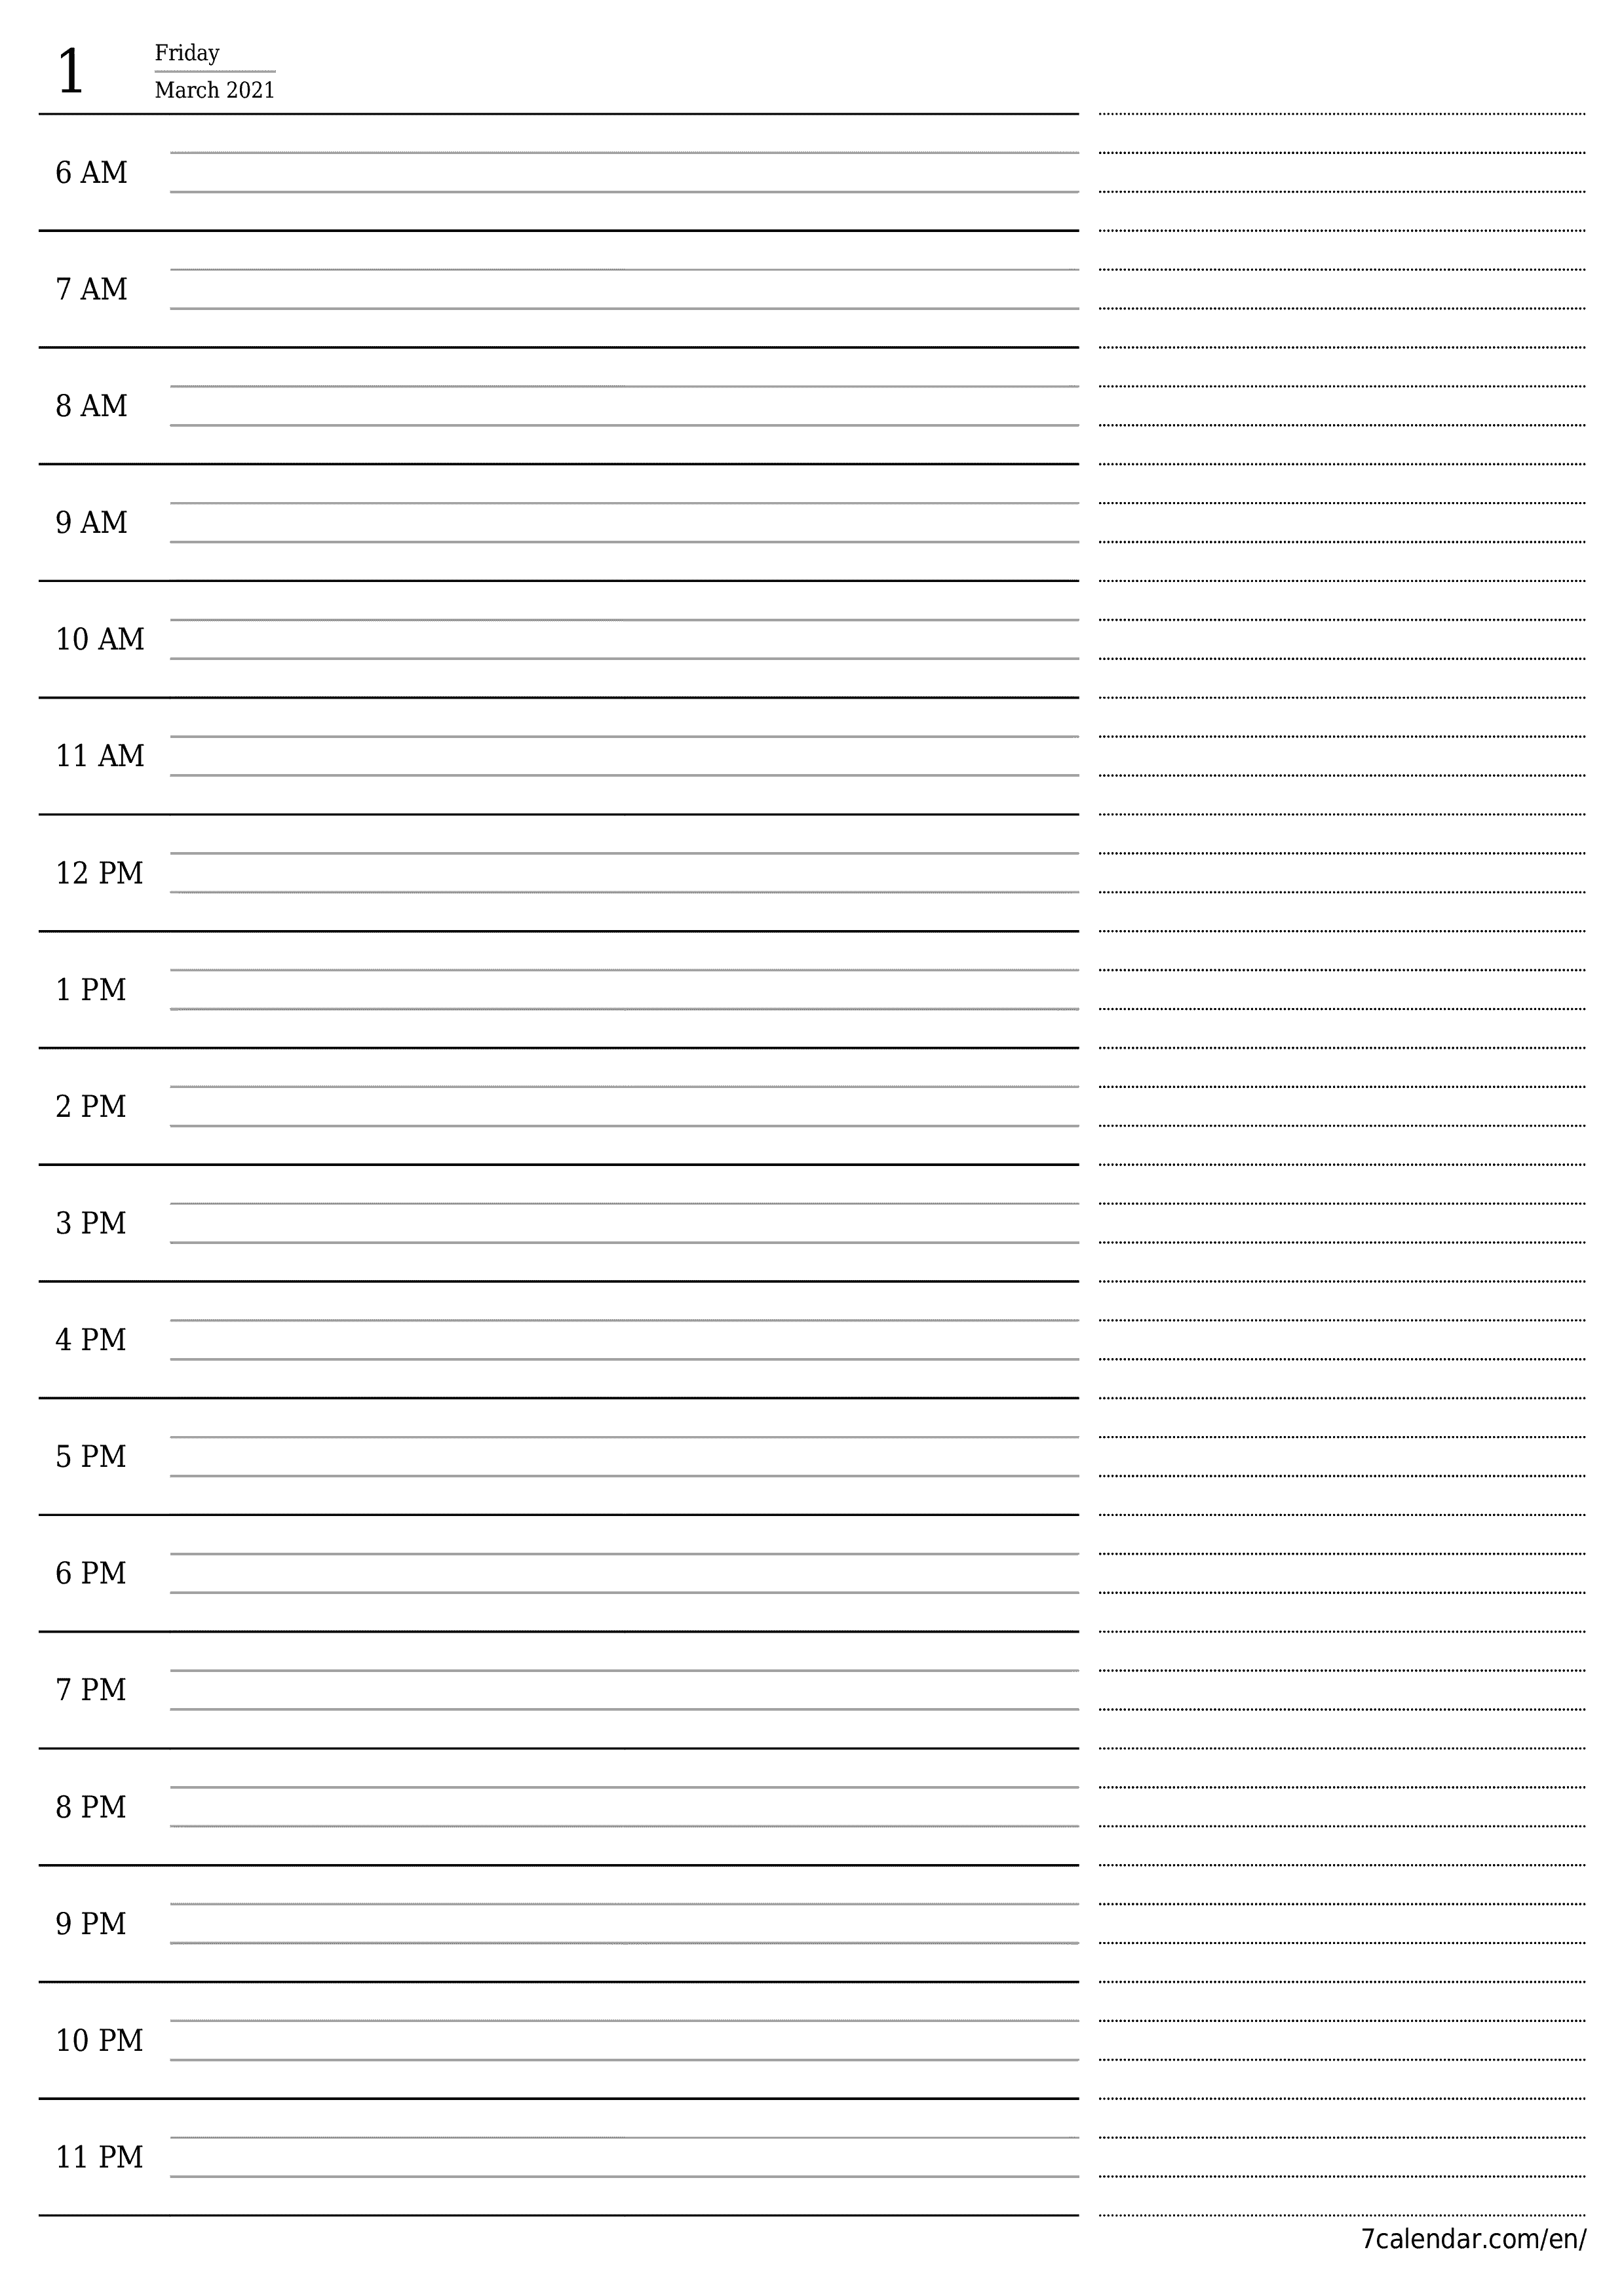 Blank daily calendar planner for day March 2021 with notes, save and print to PDF PNG English - 7calendar.com